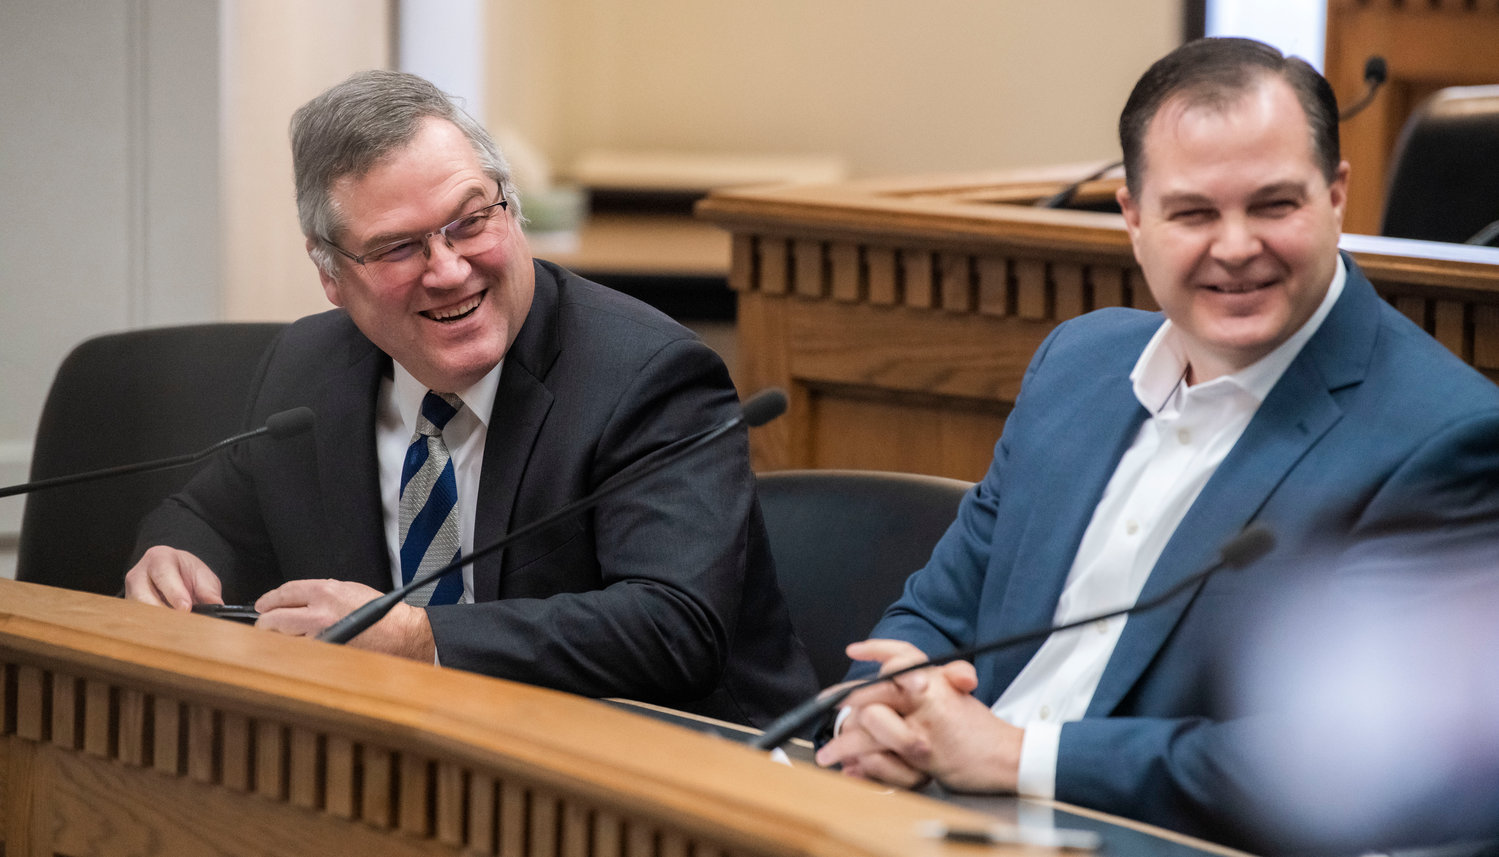 State Rep. J.T. Wilcox, R-Yelm, laughs alongside Sen. John Braun, R-Centralia, while talking to members of the press inside the John A. Cherberg Building in Olympia on Thursday, Jan. 5.